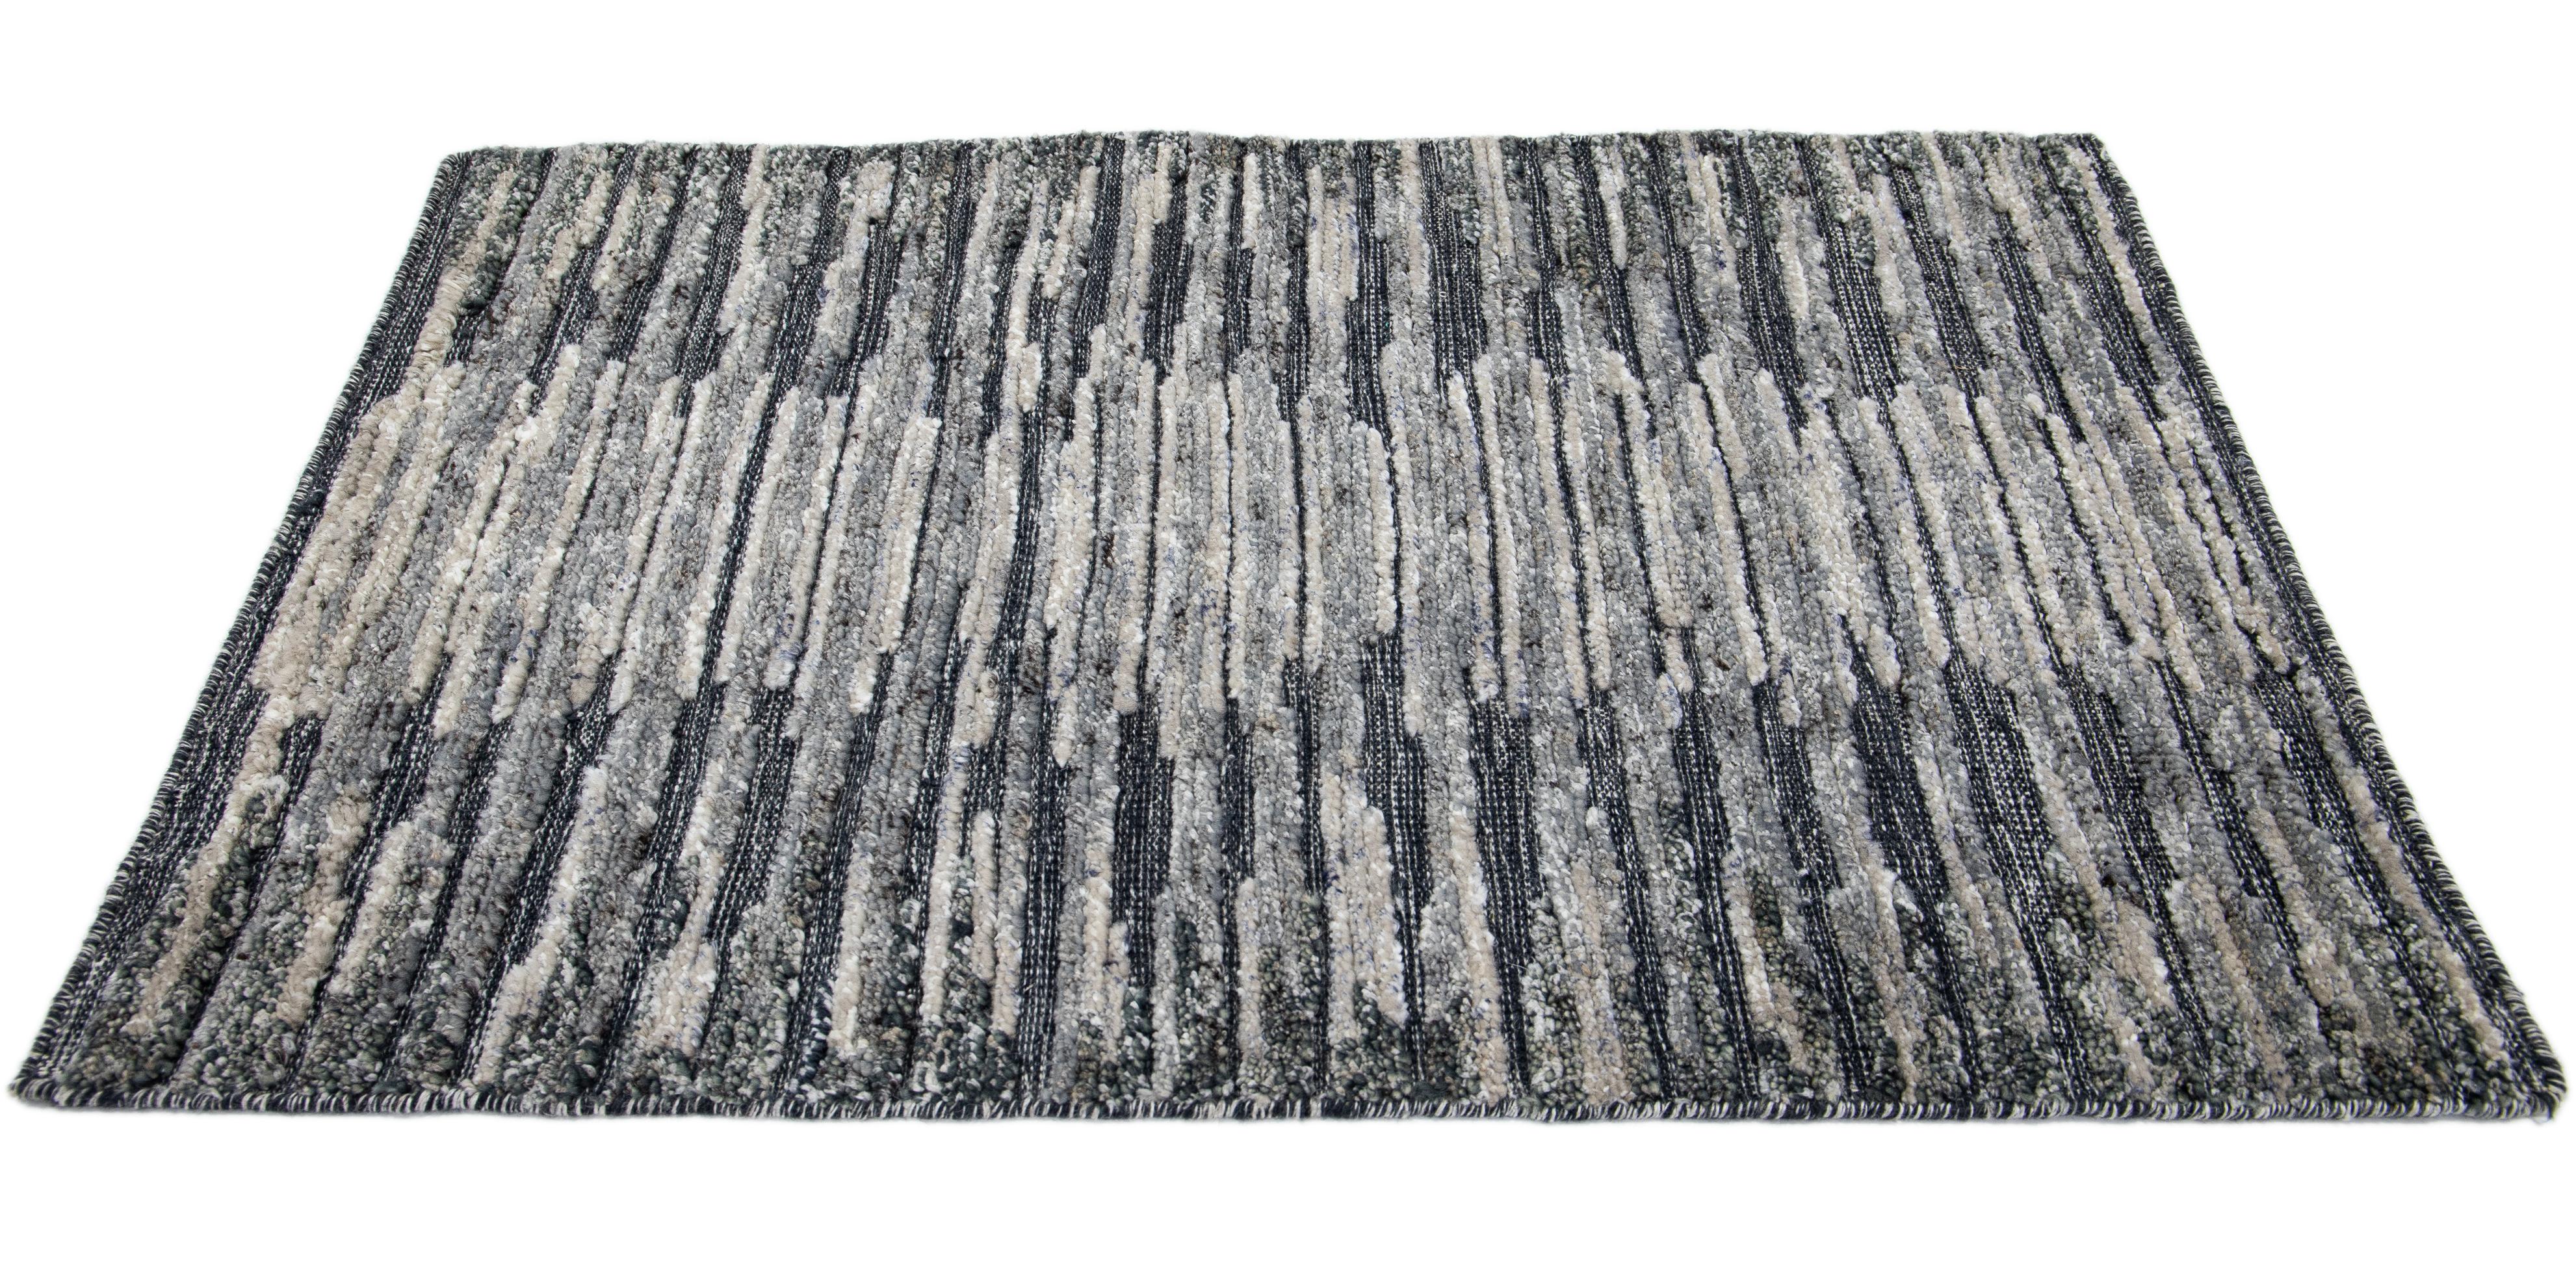 Apadana's Modern Moroccan style wool custom rug. Custom sizes and colors made-to-order. 

Material: Wool 
Techniques: hand-knotted
Style: Moroccan 
Lead time: Approx. 15-16 weeks available 
Colors: As shown, other custom colors are available.